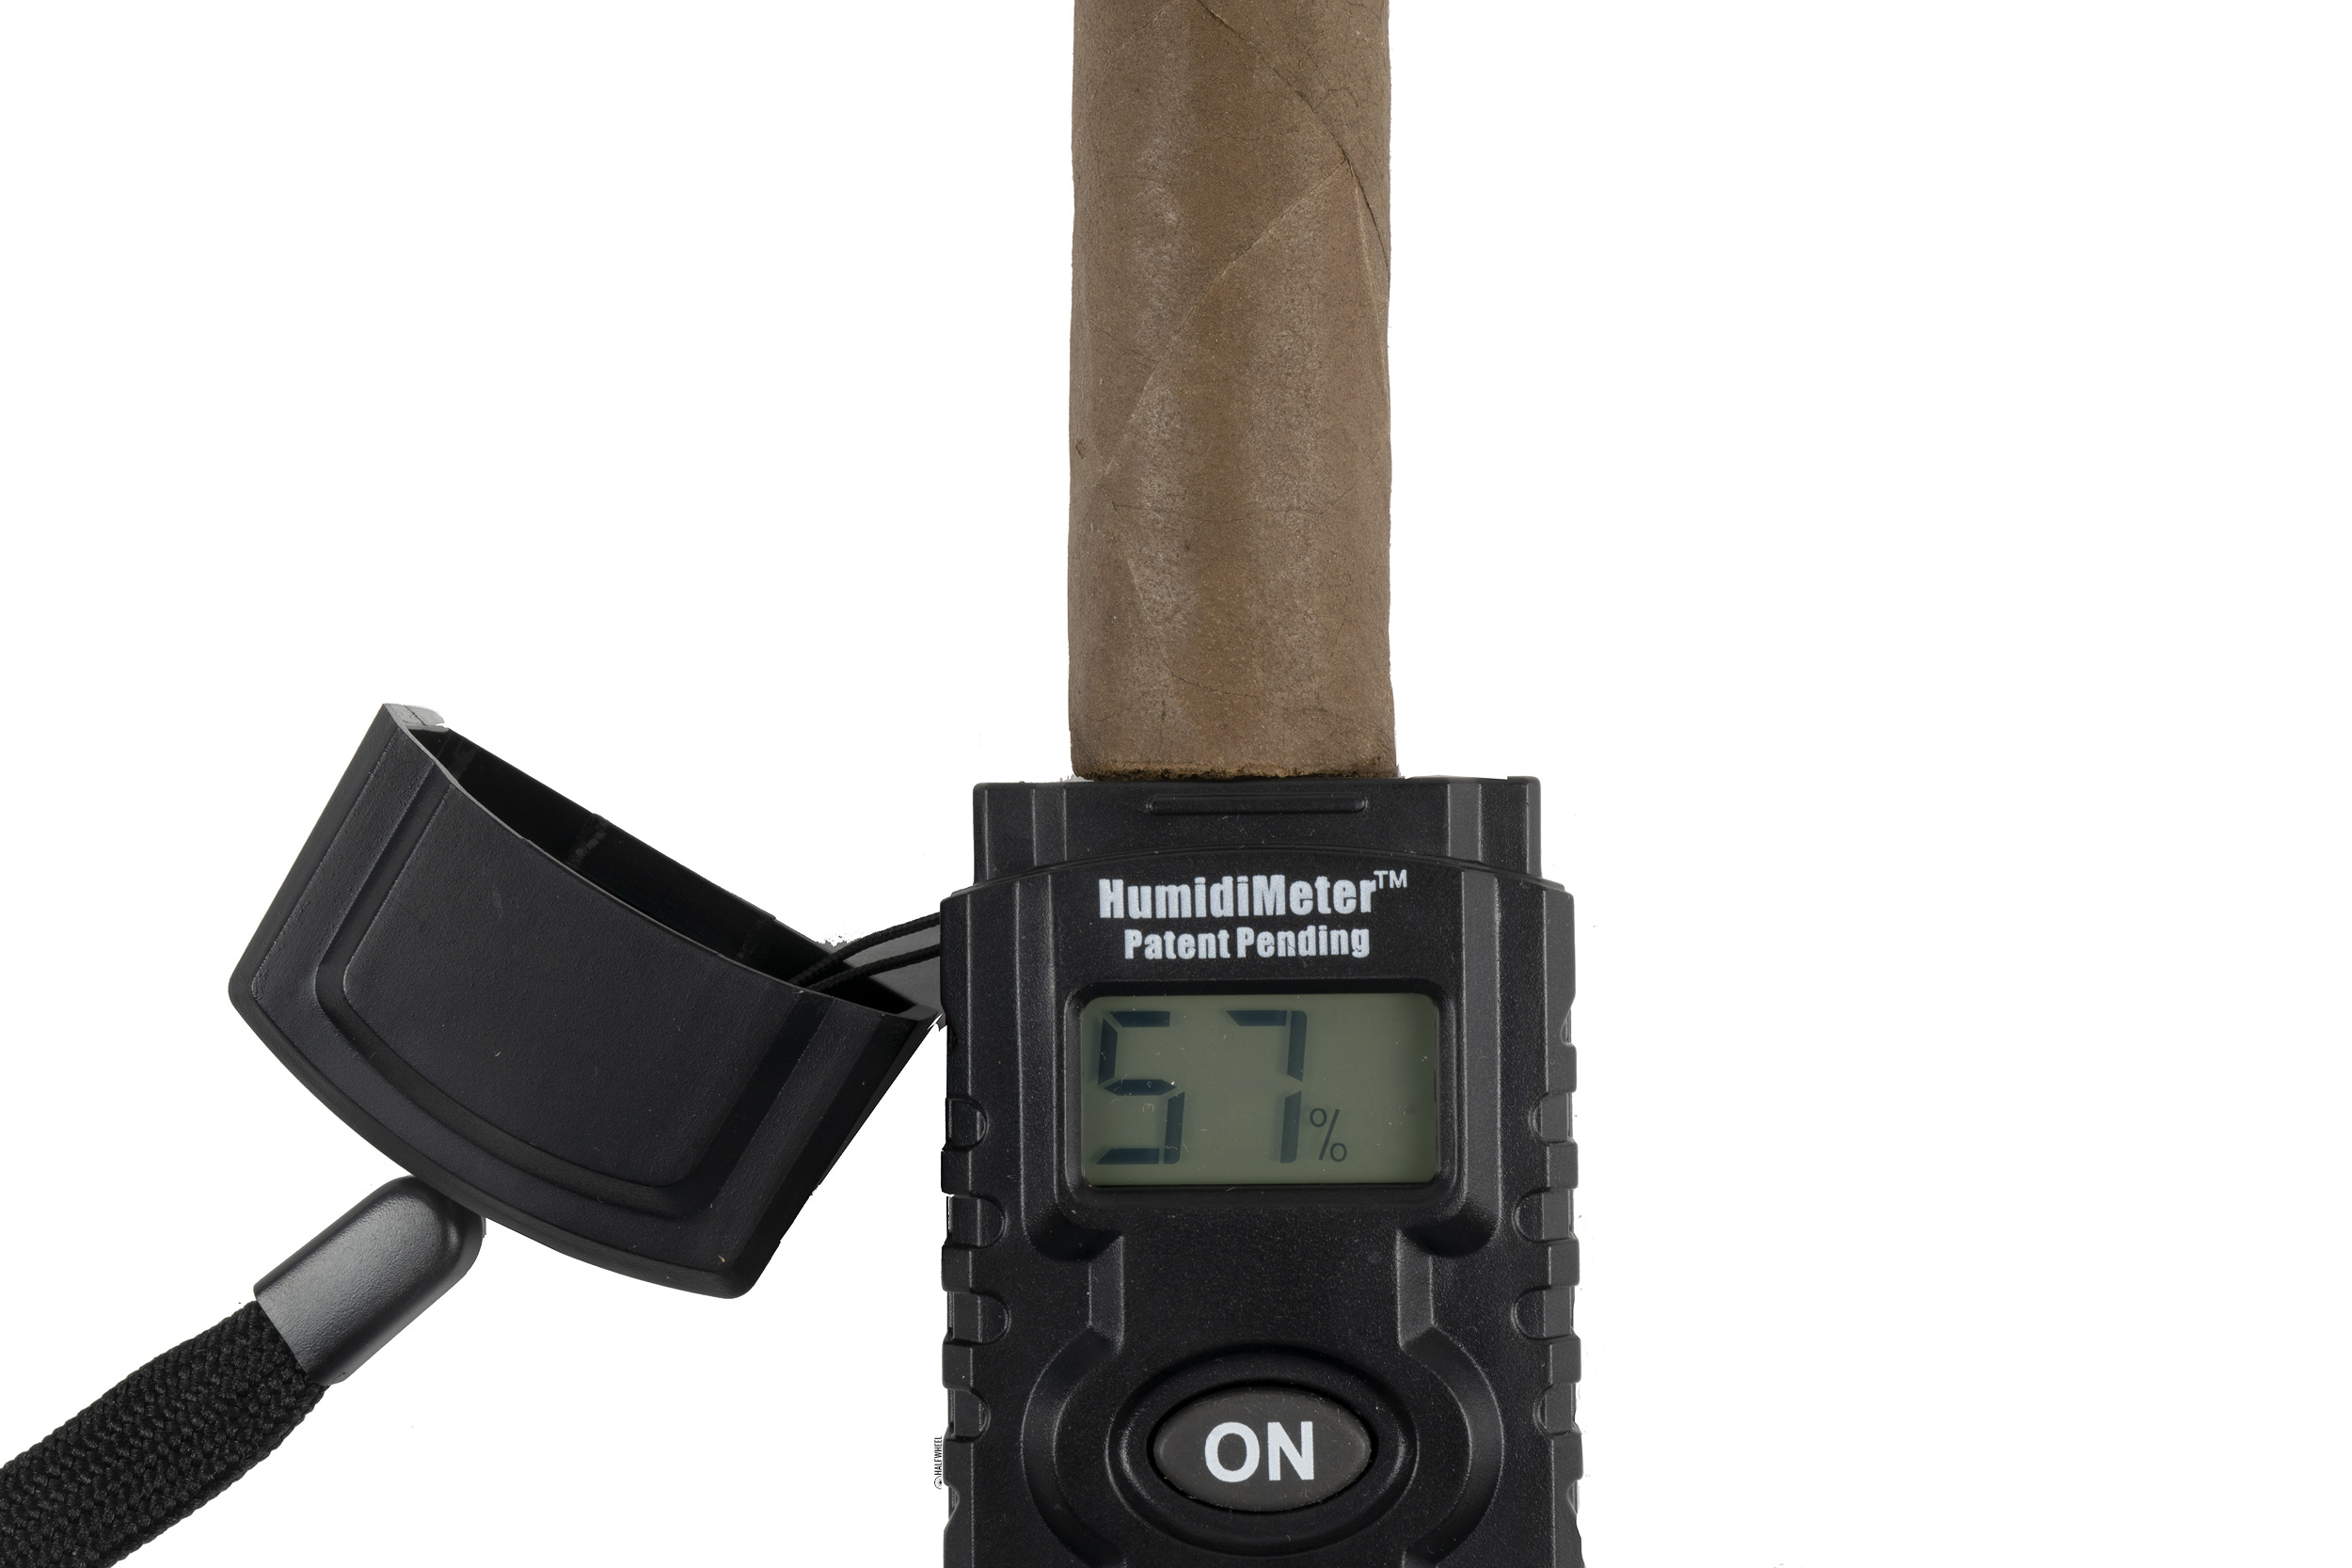 Device to check the humidity of cigars. It coverts leaf moisture